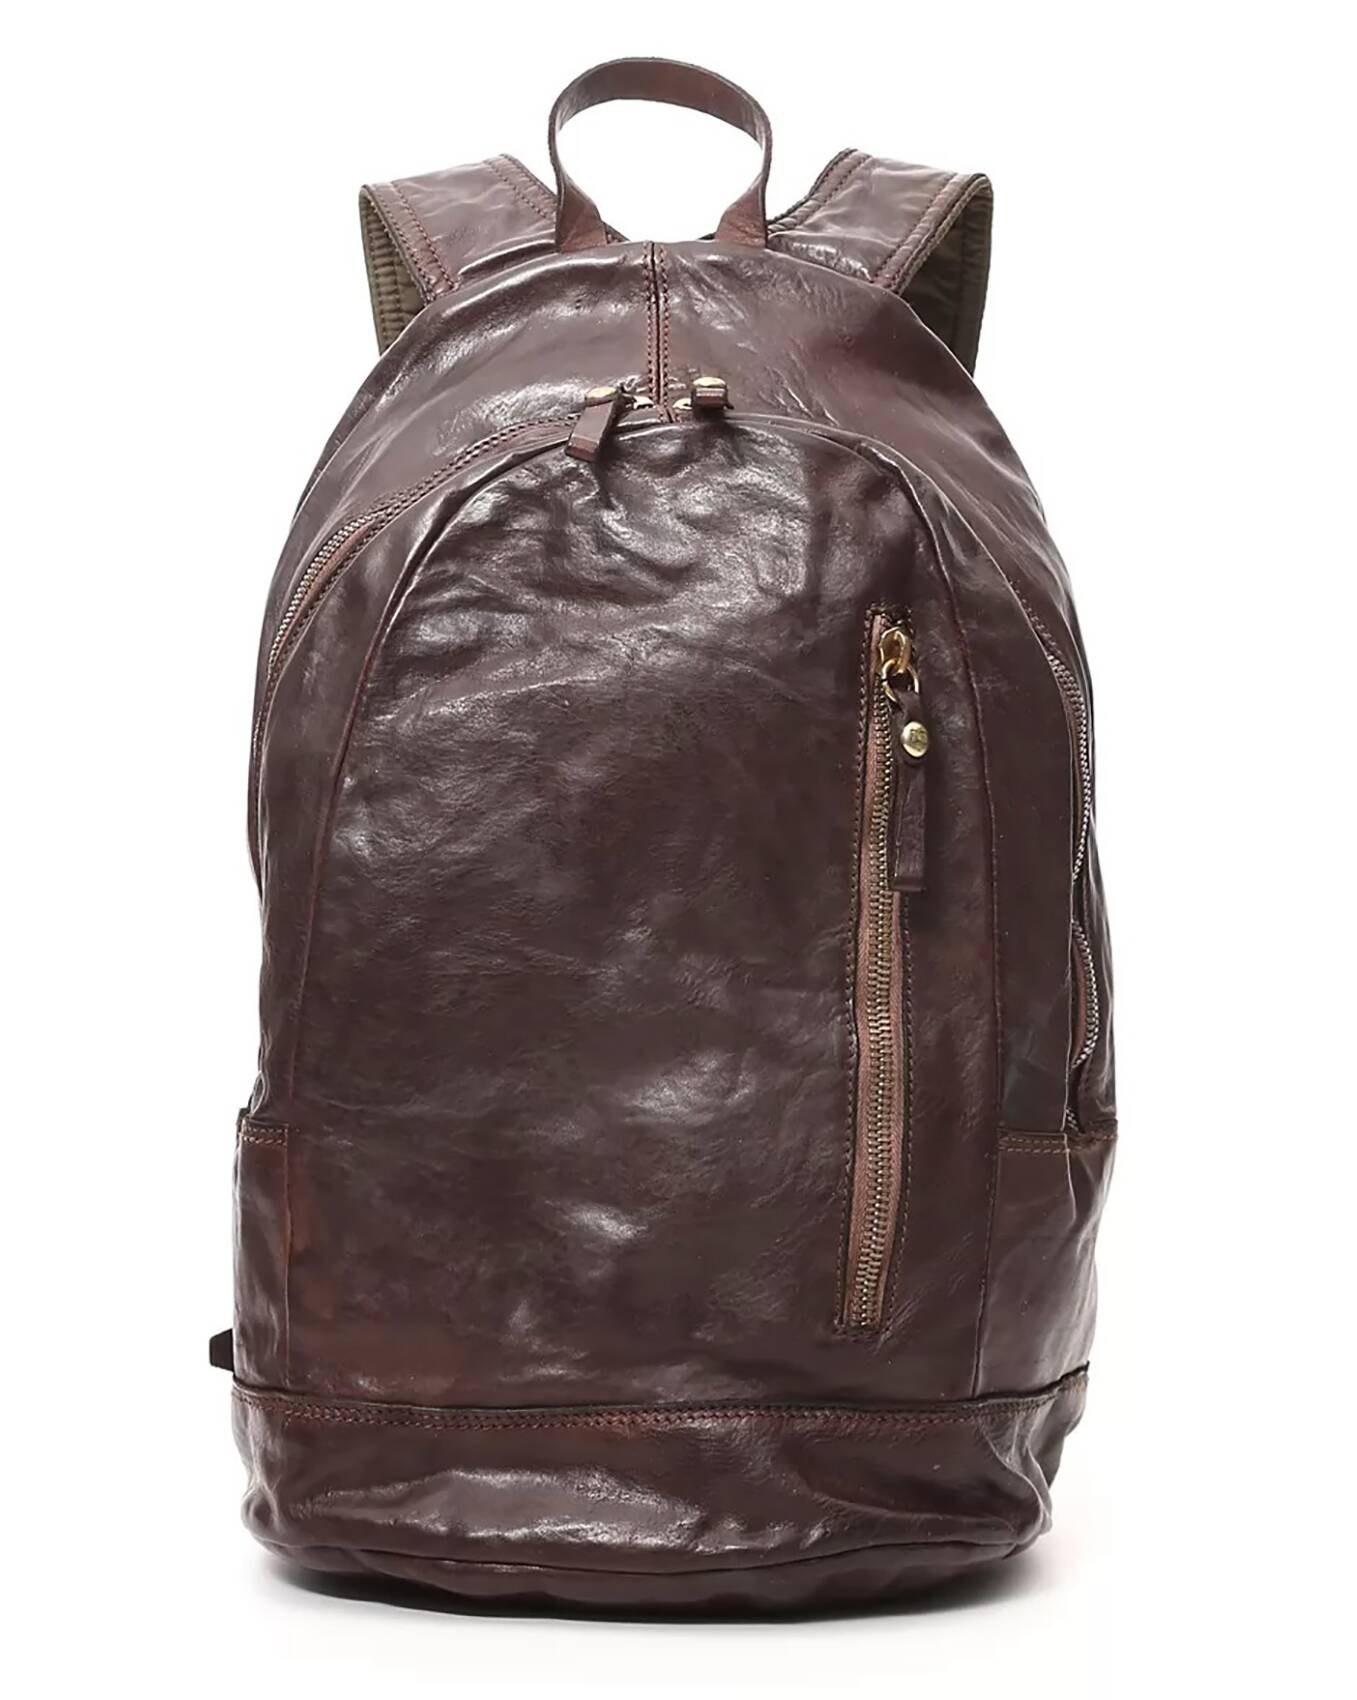 Backpack ZAINO VACC. brown | U | Selection | purchase online